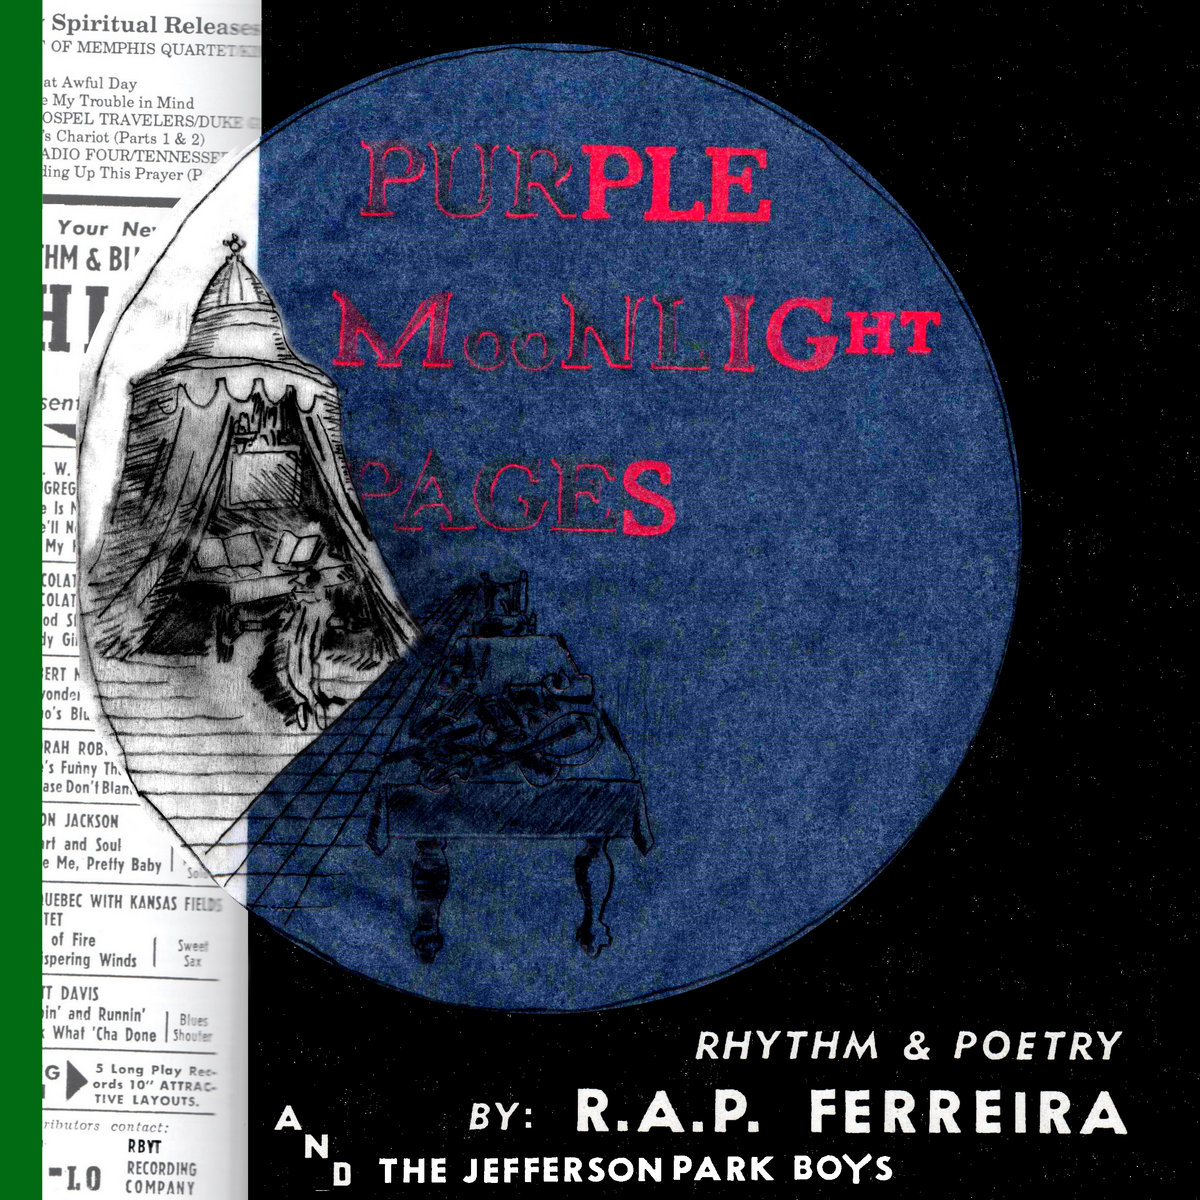 RAP Ferreira- Purple Moonlight PagesA beautifully composed LP, with abstract raps laced over incredibly jazzy and smooth instrumentals. This album grows on me more with each listen, Ferreira's charm shining brighter every new spin. The most underrated hip hop release of 2020.